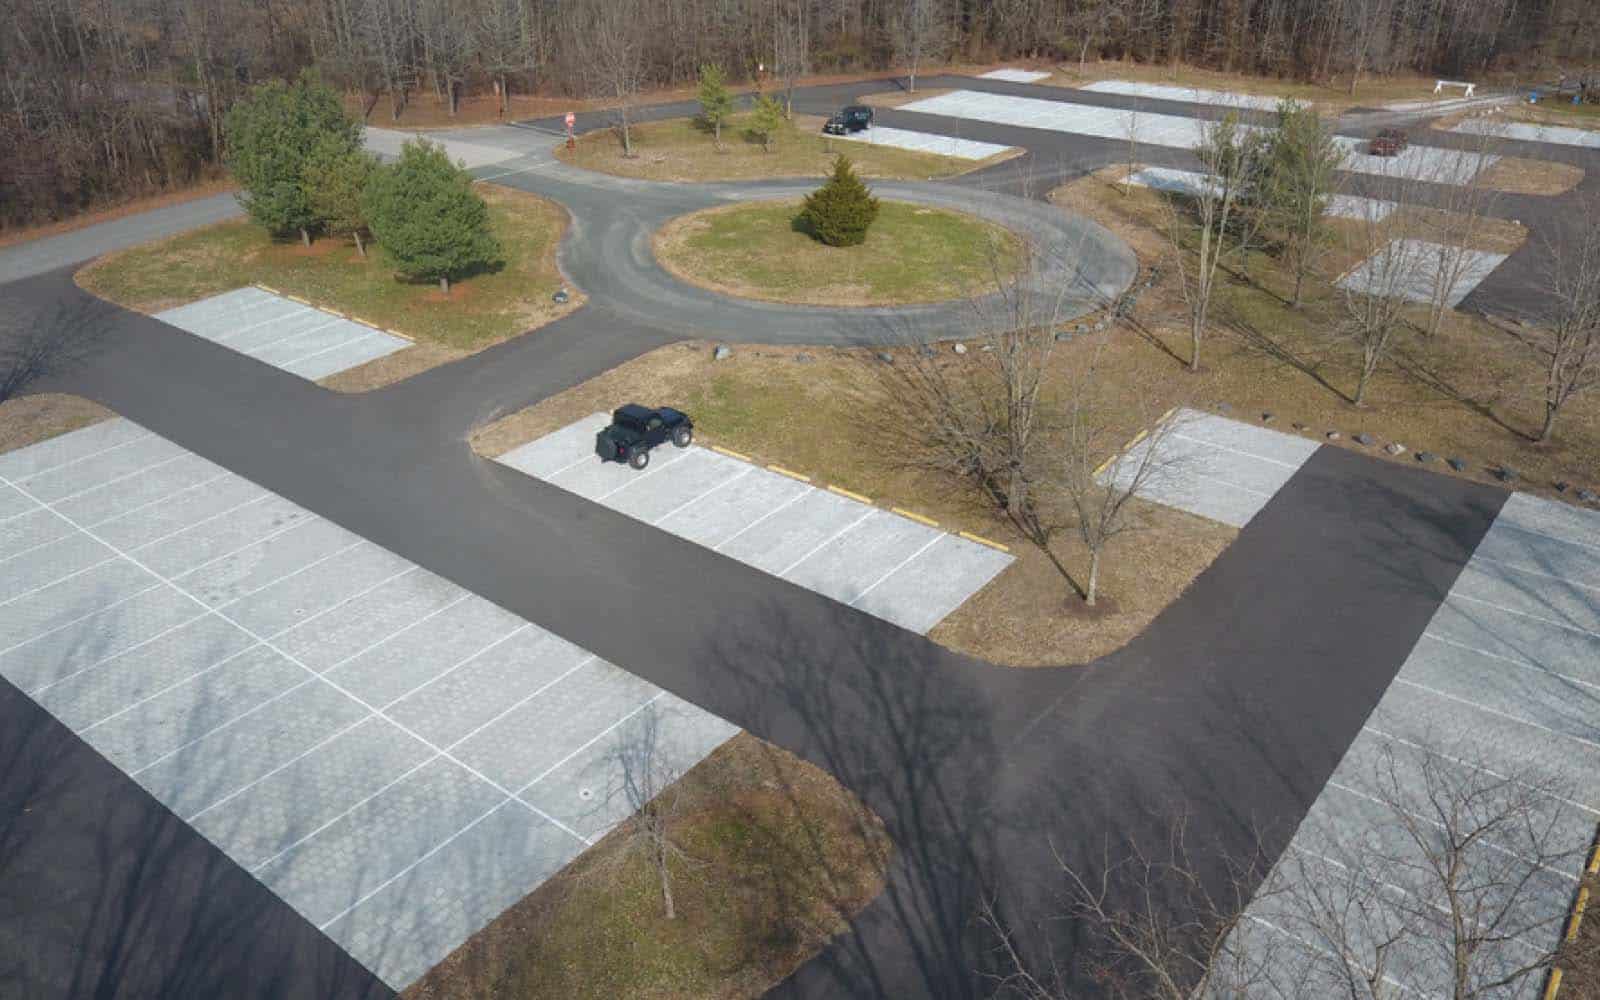 Case studies - Gravel parking is replaced with permeable paving system to reduce clogging and maintenance in Baltimore, MD